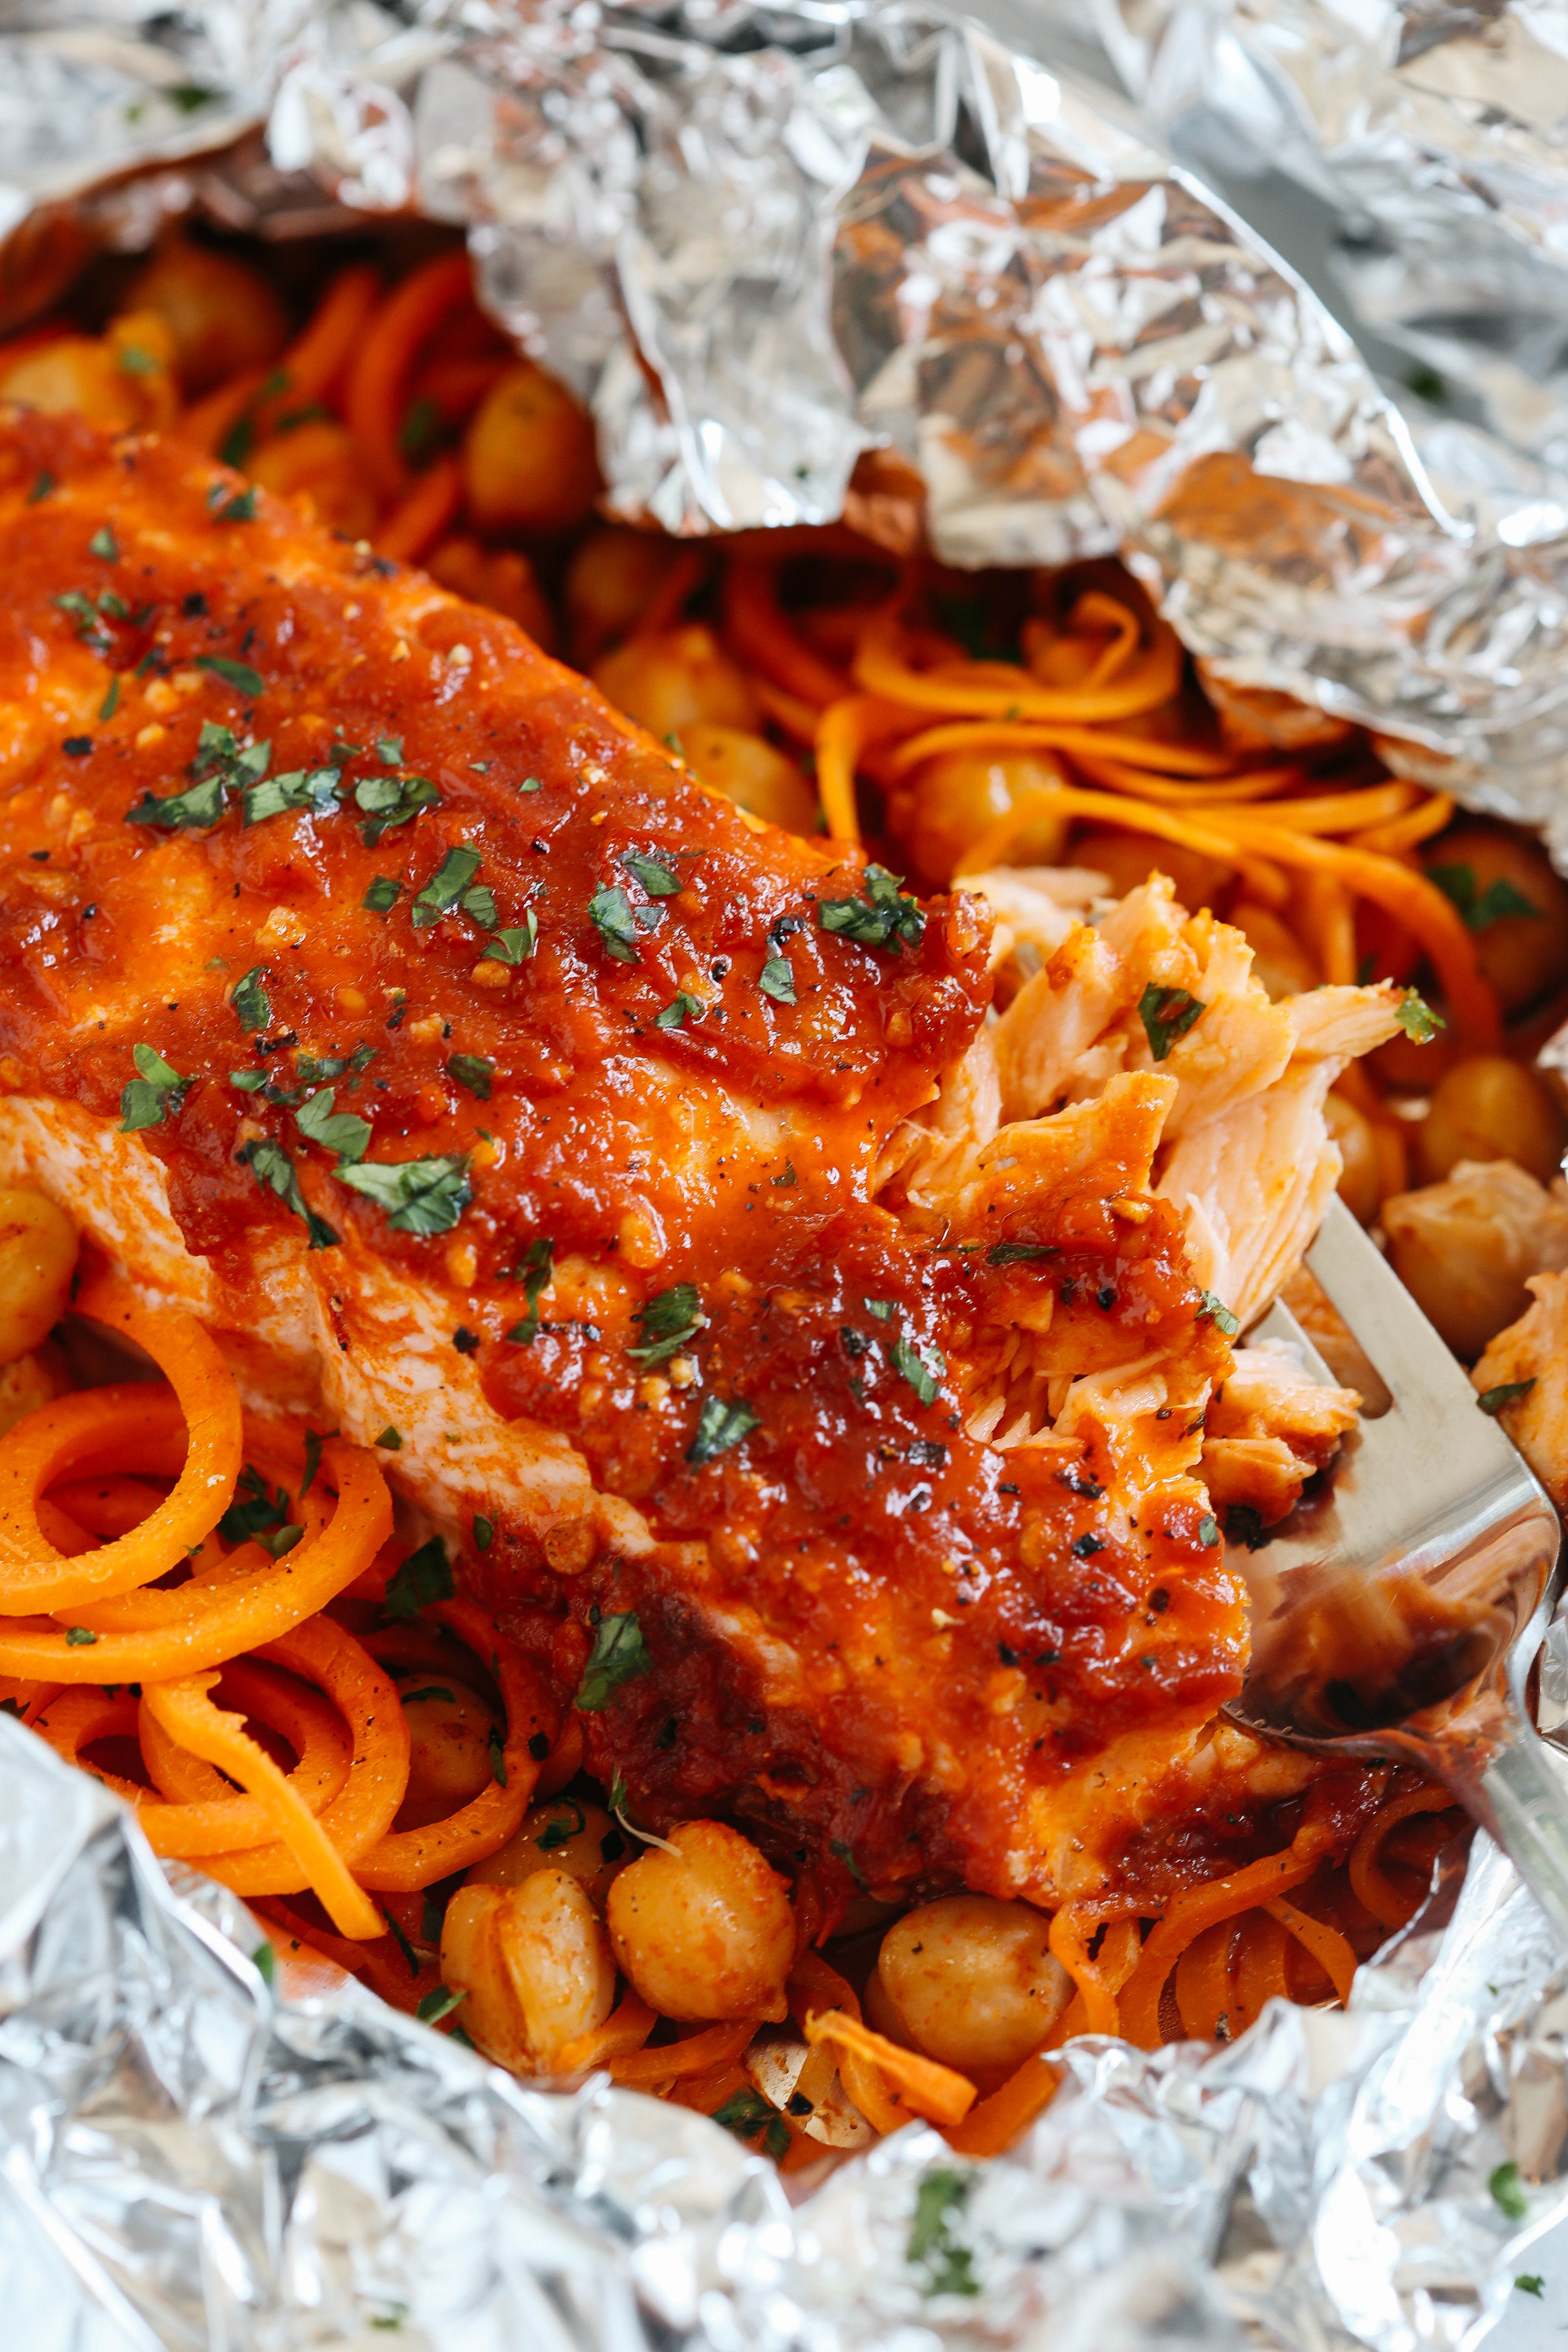 These Moroccan Salmon Foil Packets with Carrot Noodles & Chickpeas are sweet and spicy with tons of flavor and are easily made in just 20 minutes with little to no clean-up!